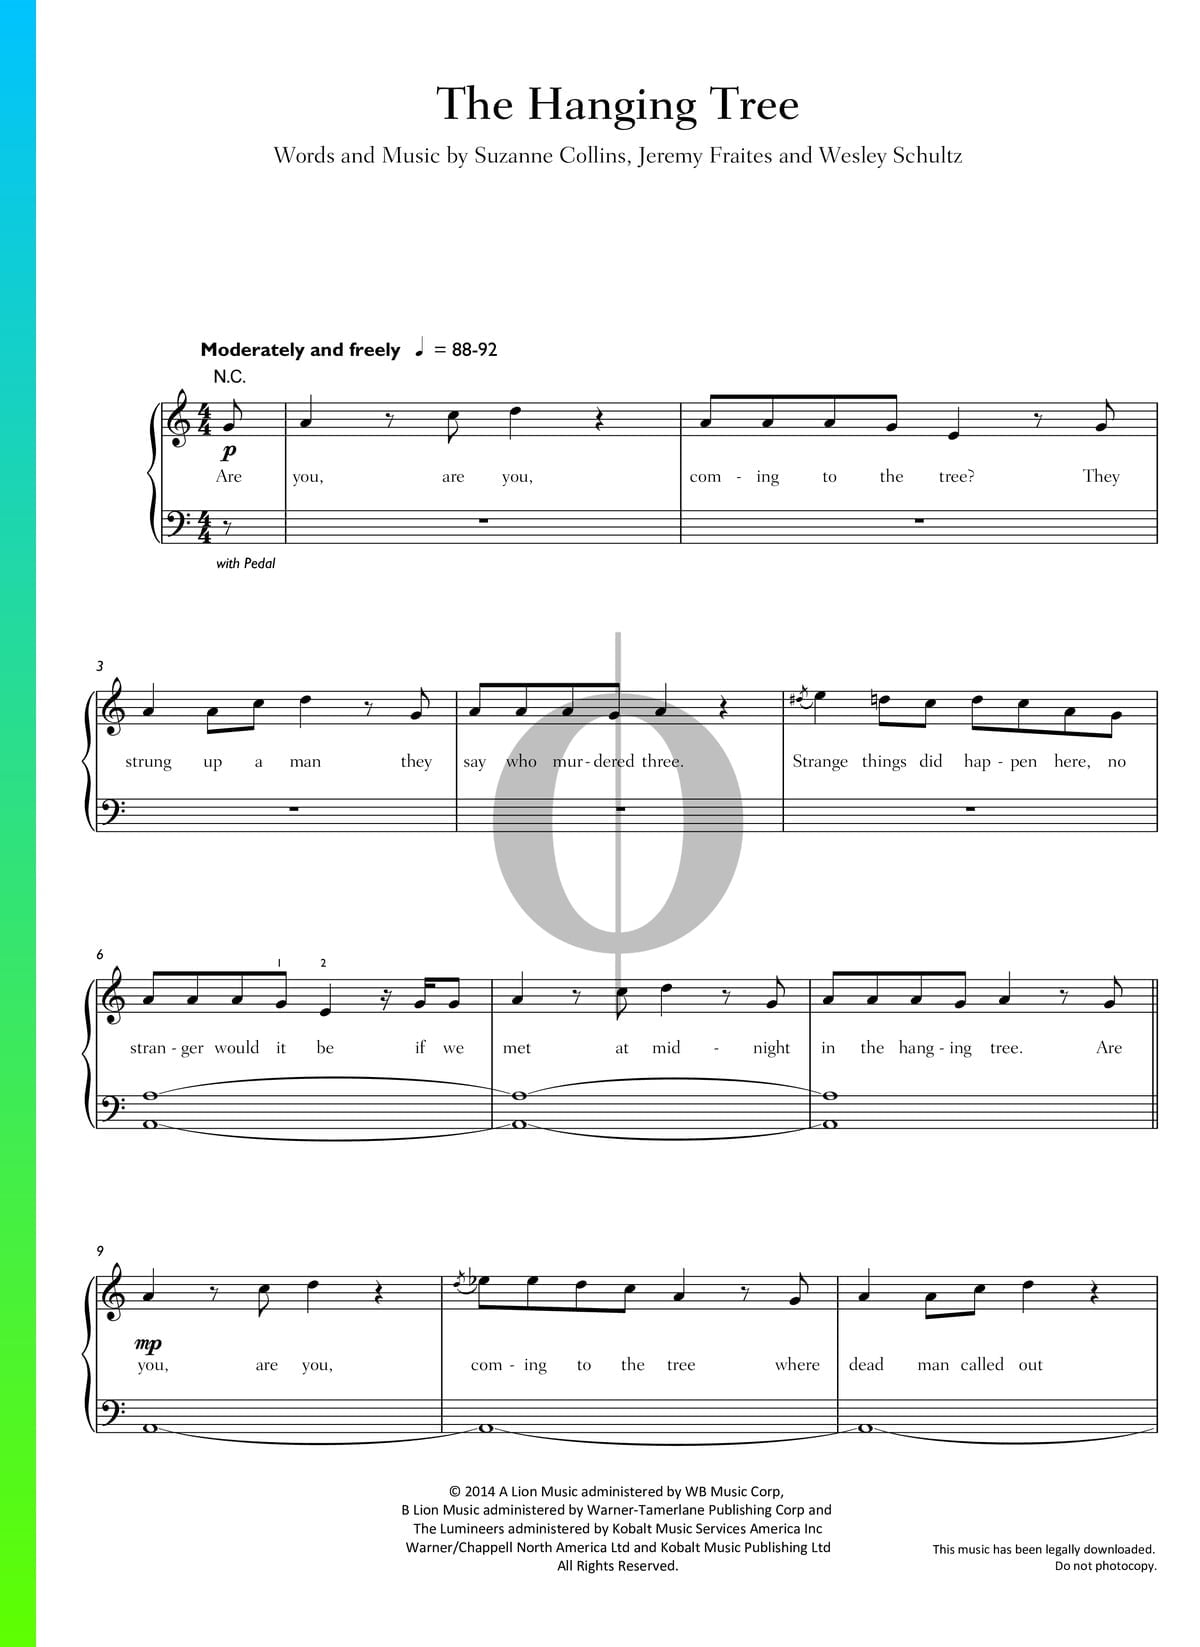 The Hanging Tree - Sheet music for Piano